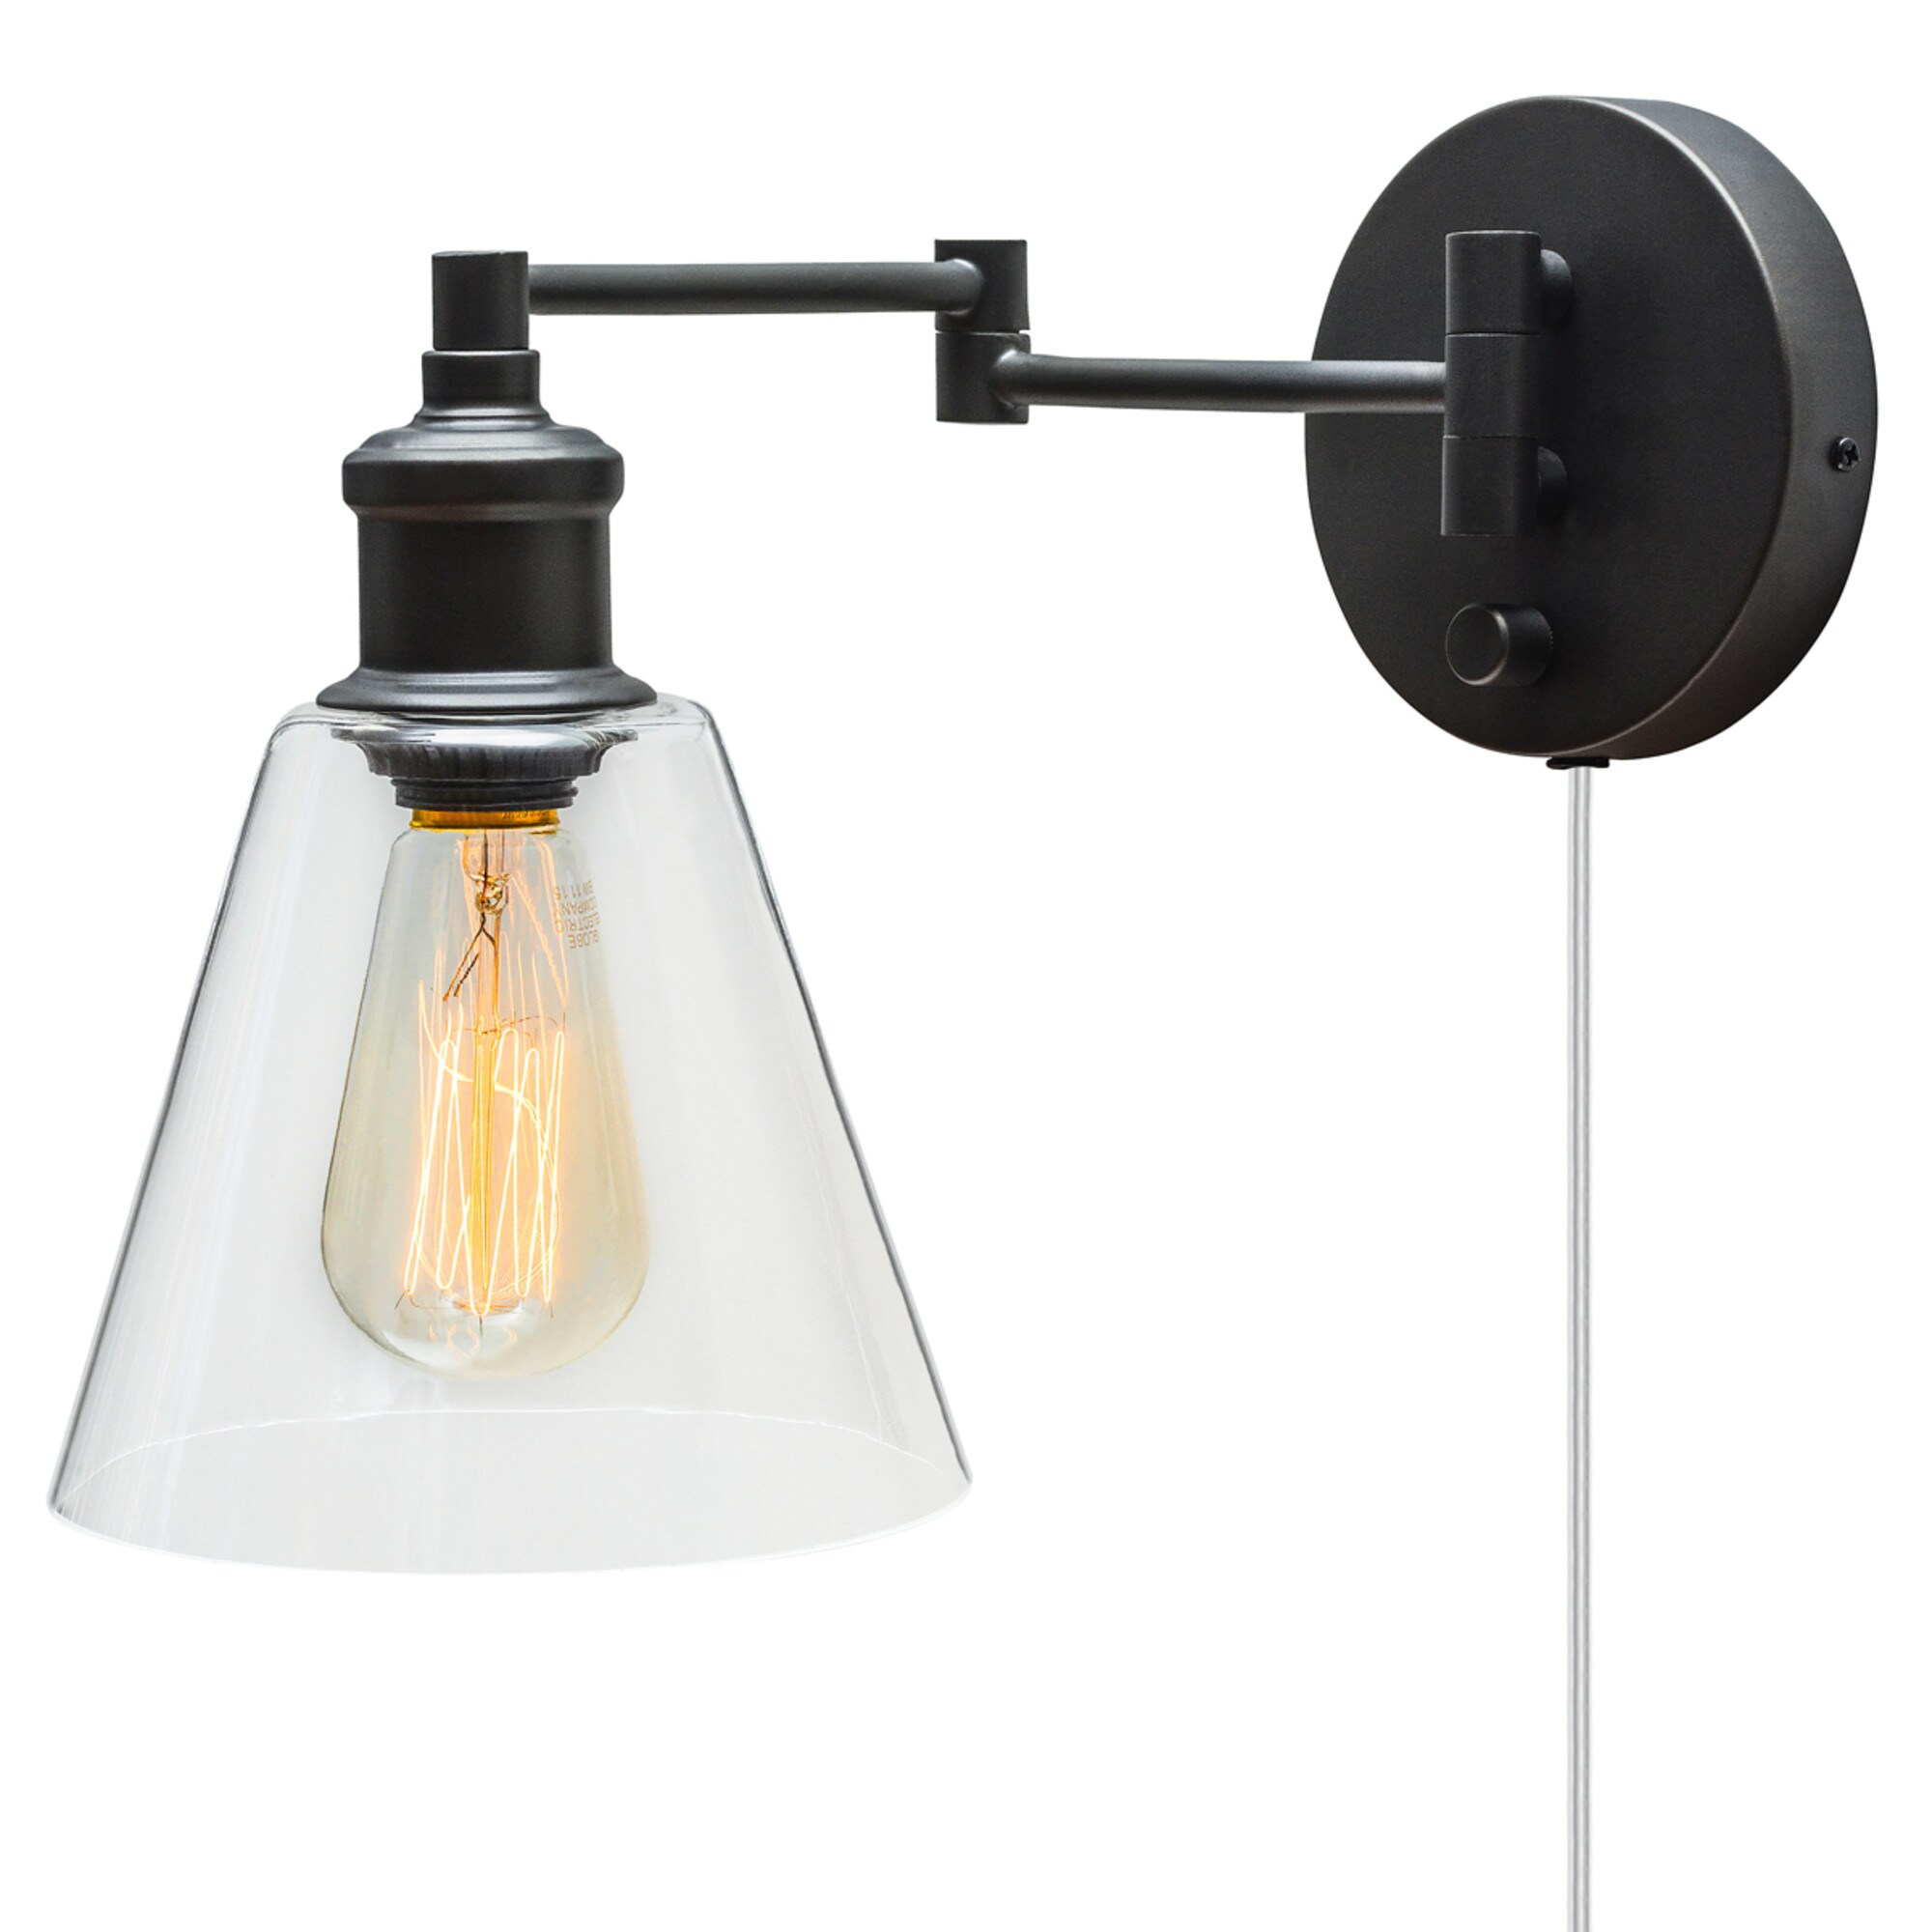 Globe Electric LeClair 1-light Dark Bronze Industrial Wall Sconce for sale online 